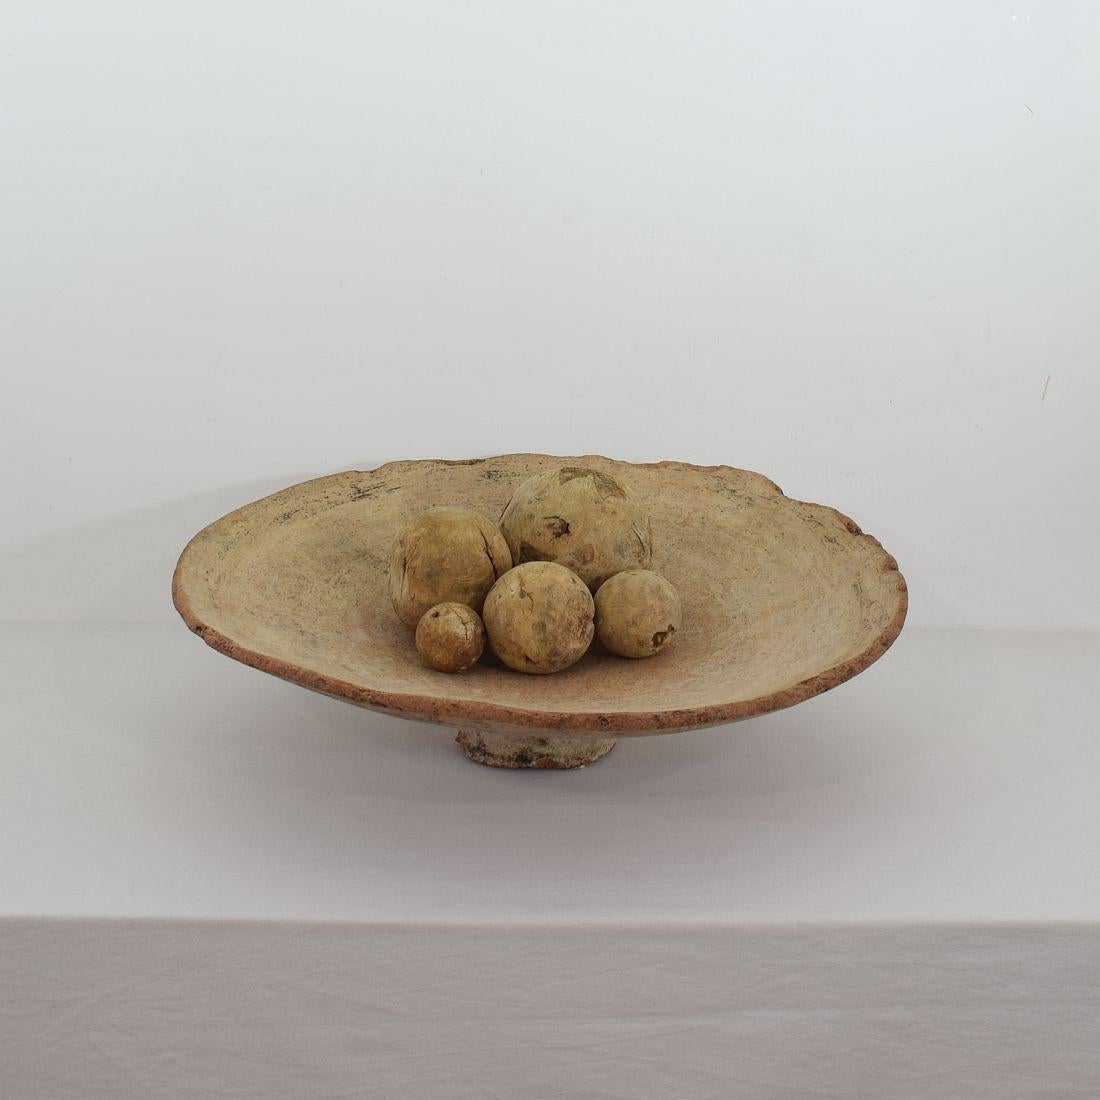 Beautiful weathered Moroccan terracotta couscous/bread bowl. Highly decorative.
Morocco mid-19th century, weathered and small losses.